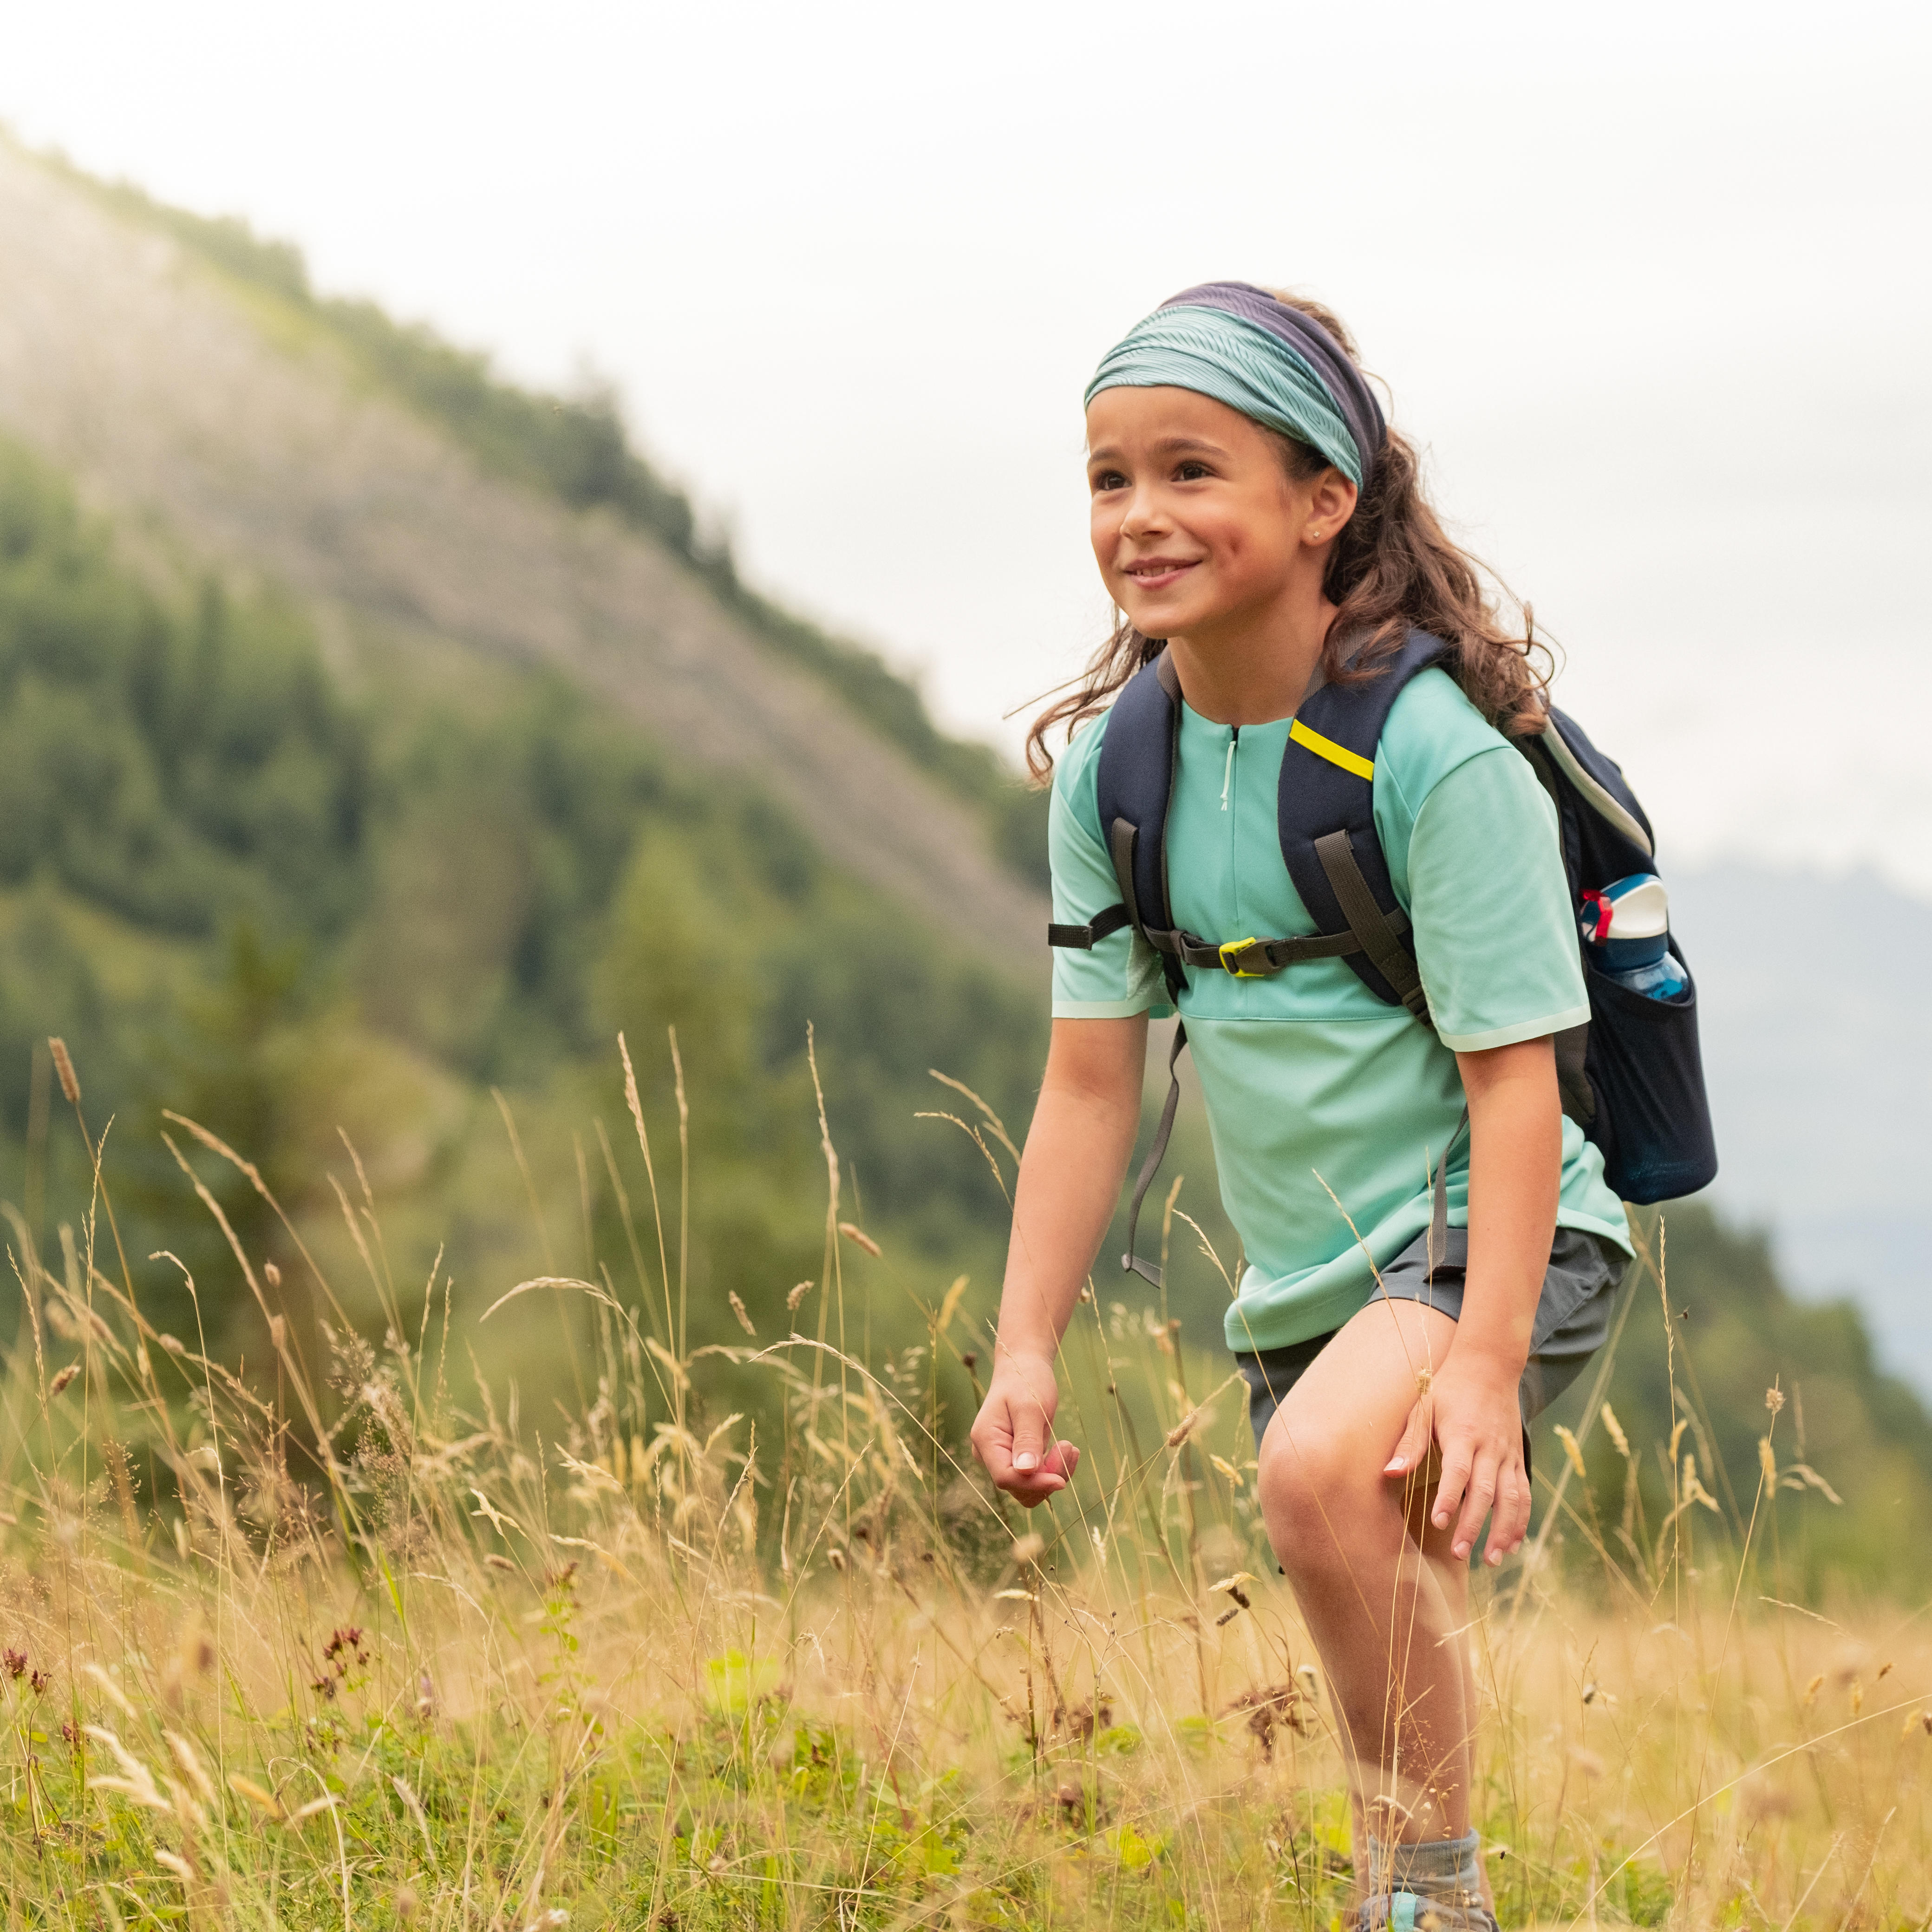 Kid's Outdoor Gear Guide: Clothing Edition